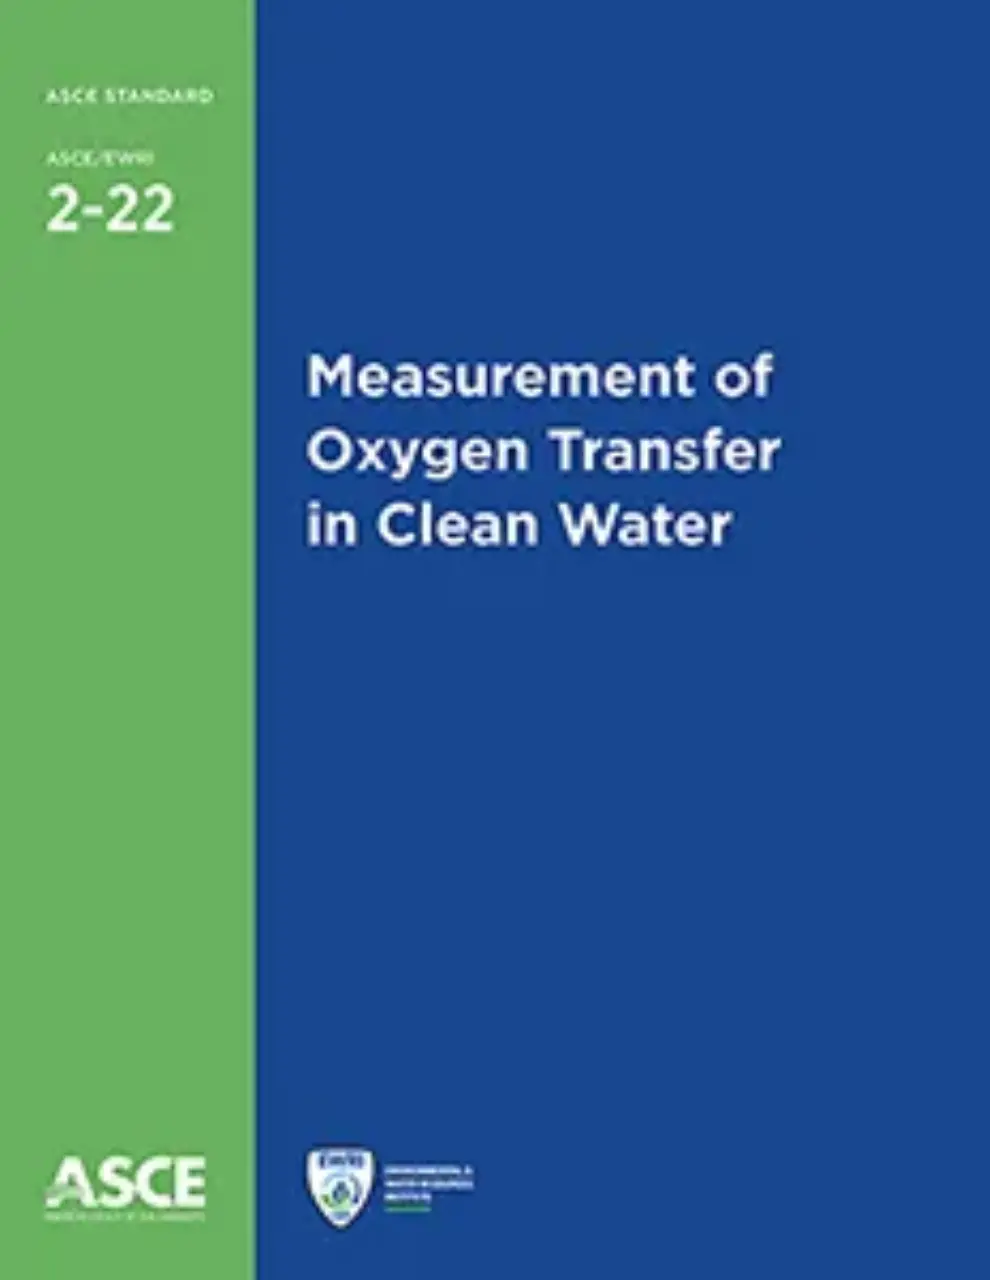 Updated ASCE Standard 2 Helps Measure Oxygen Transfer Rate to Water